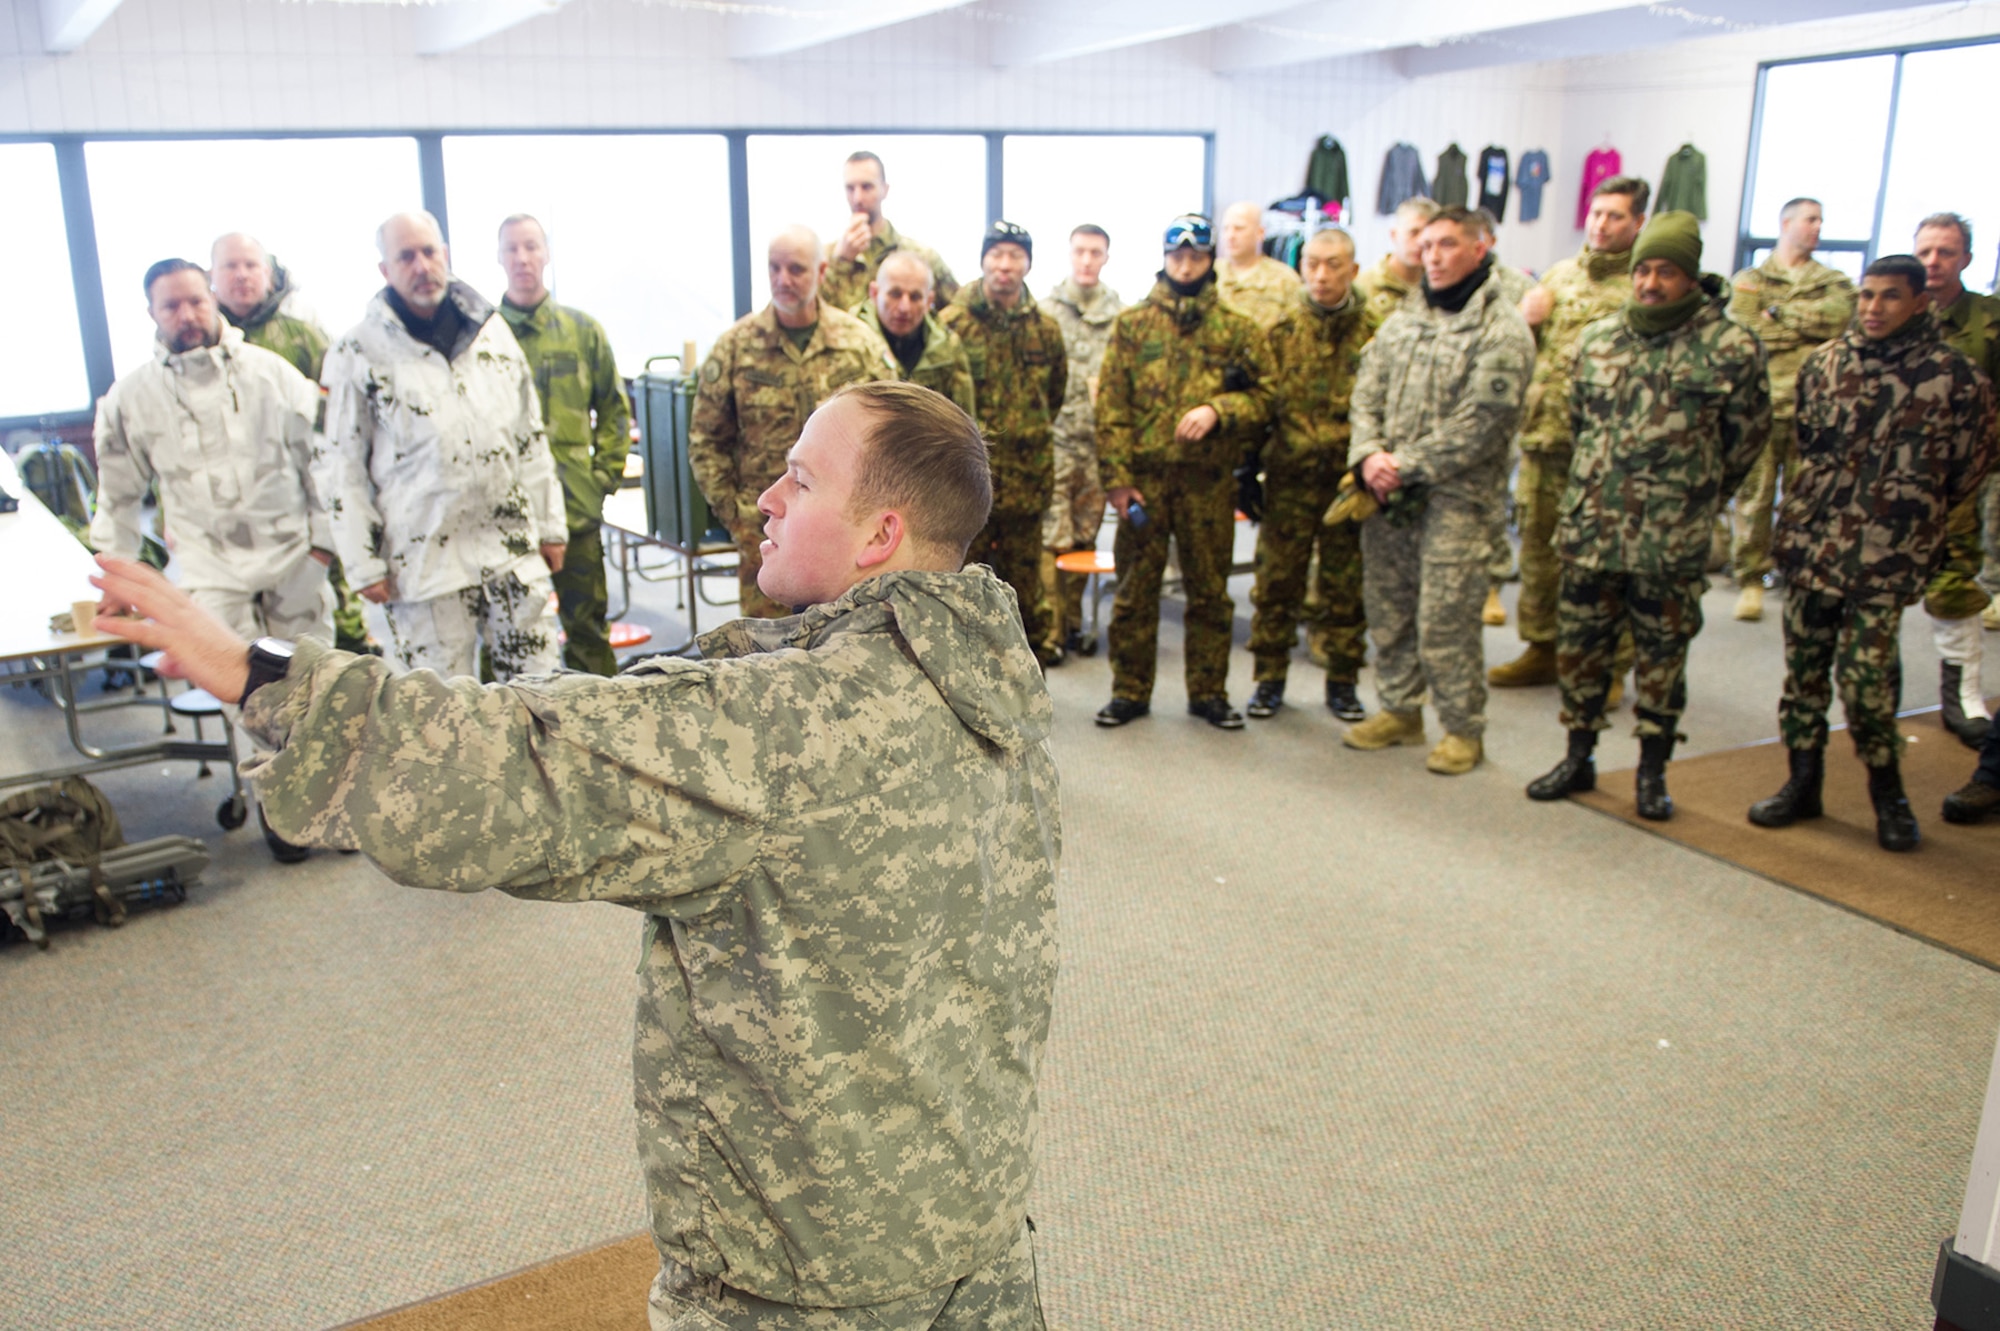 U.S., Allied, and partner-nation Soldiers from nine countries participate in the Cold Regions Military Collaborative Training Event at Arctic Valley in Joint Base Elmendorf-Richardson, Alaska, Feb. 22, 2018. The U.S. Army Alaska hosted event focused on strengthening relationships among allied and partner nations with experience operating in cold weather, and at high elevations; and set conditions for future collaboration.